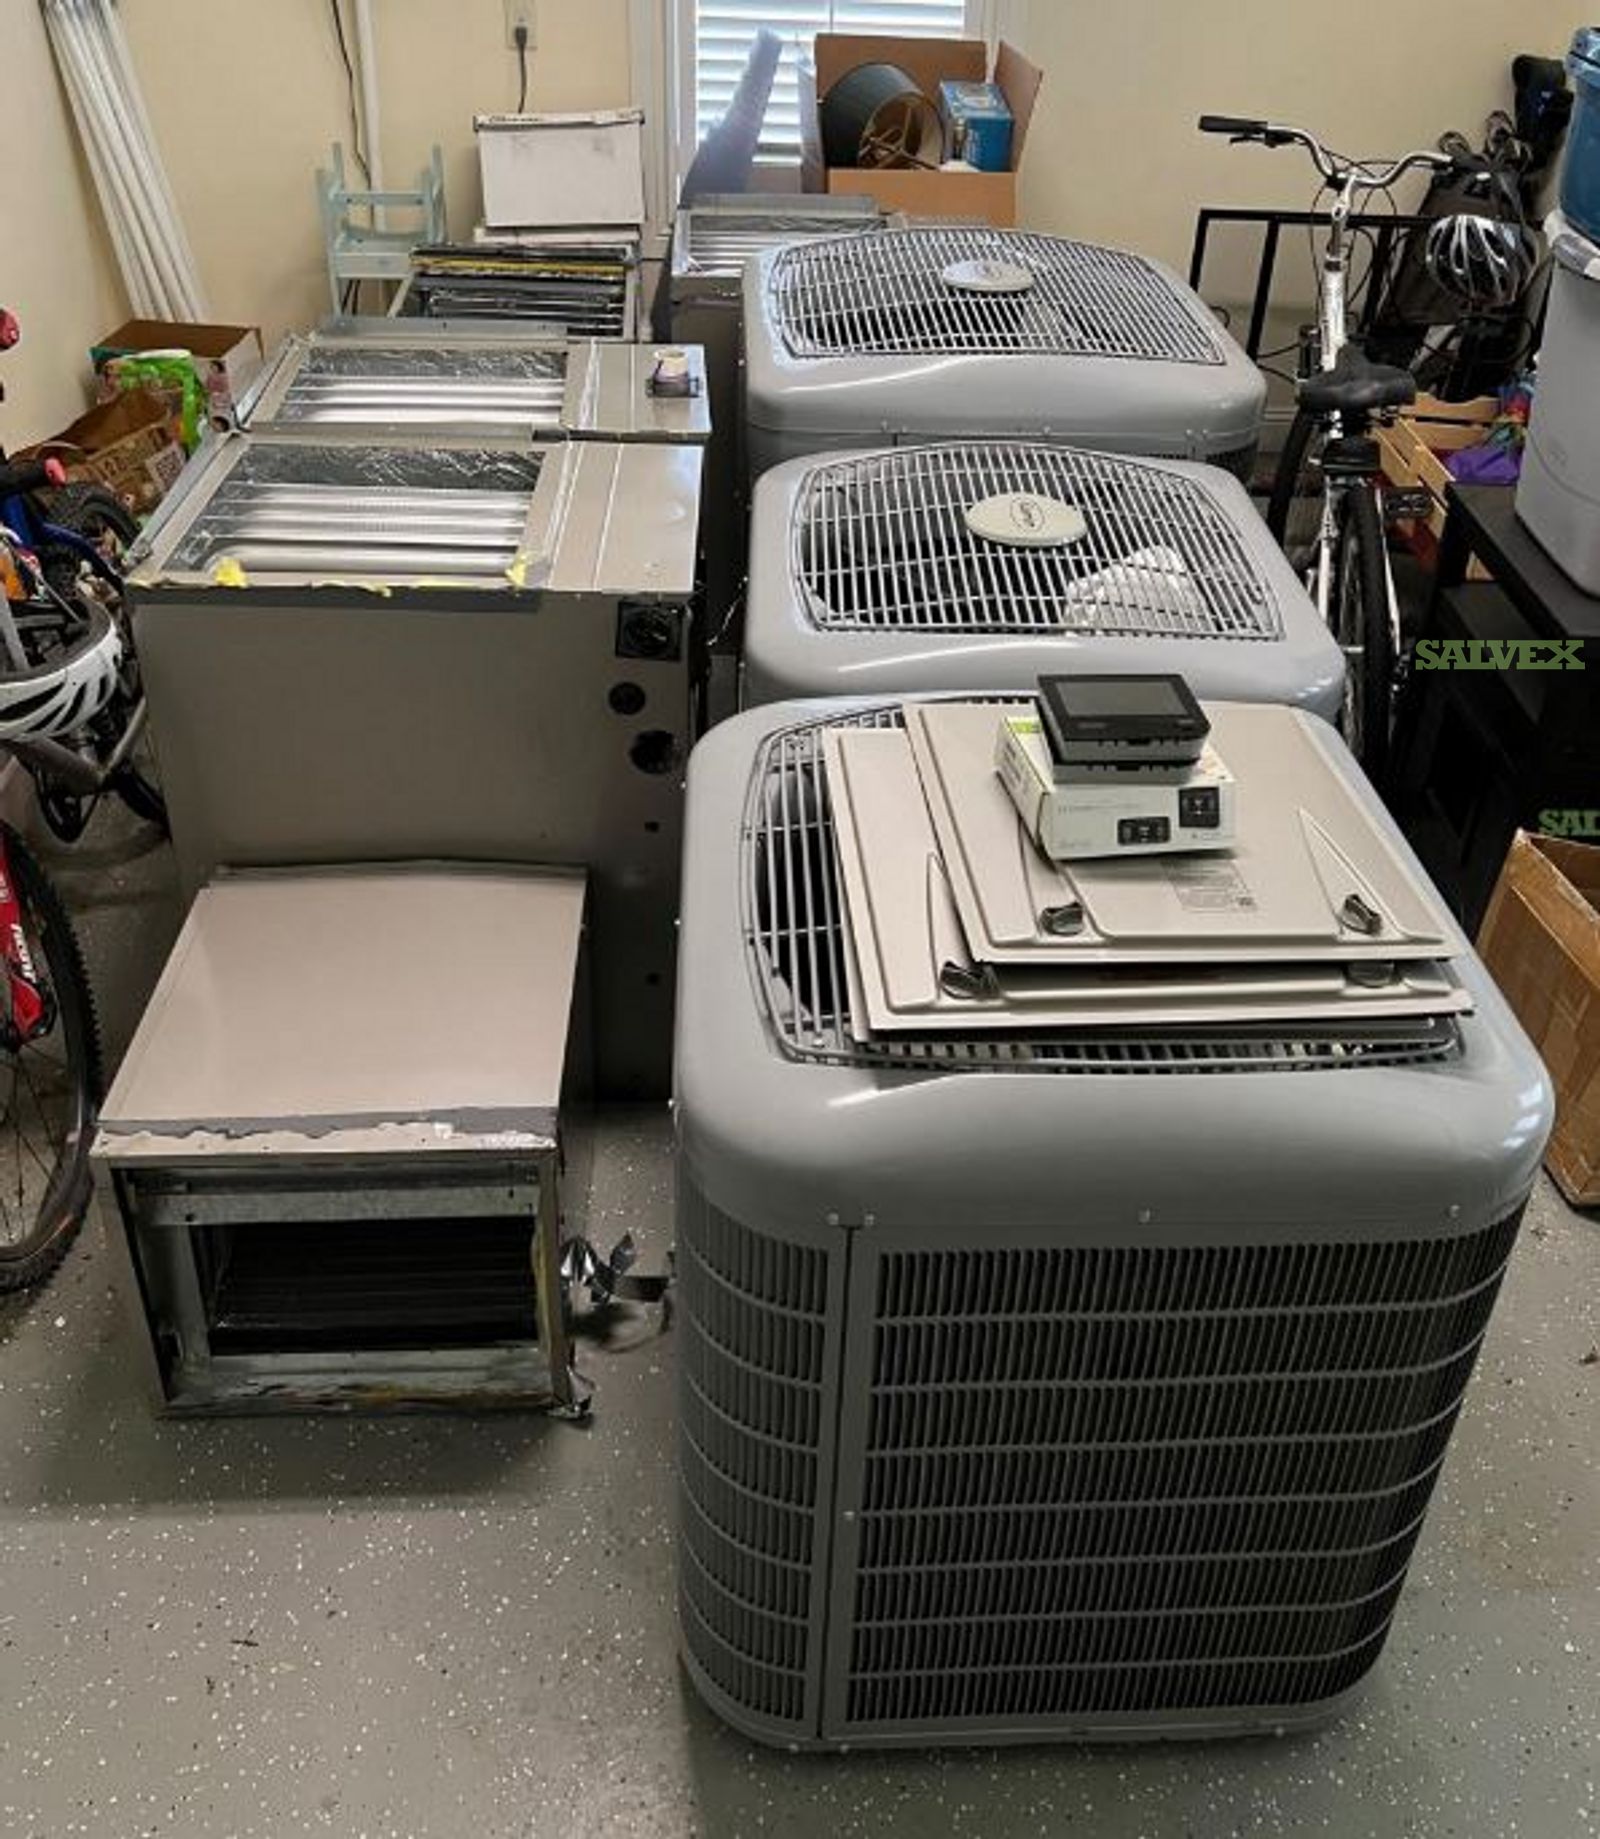 HVAC Carrier Systems - 3 Ton 17 Seer Residential 2 stage units (3 Systems)